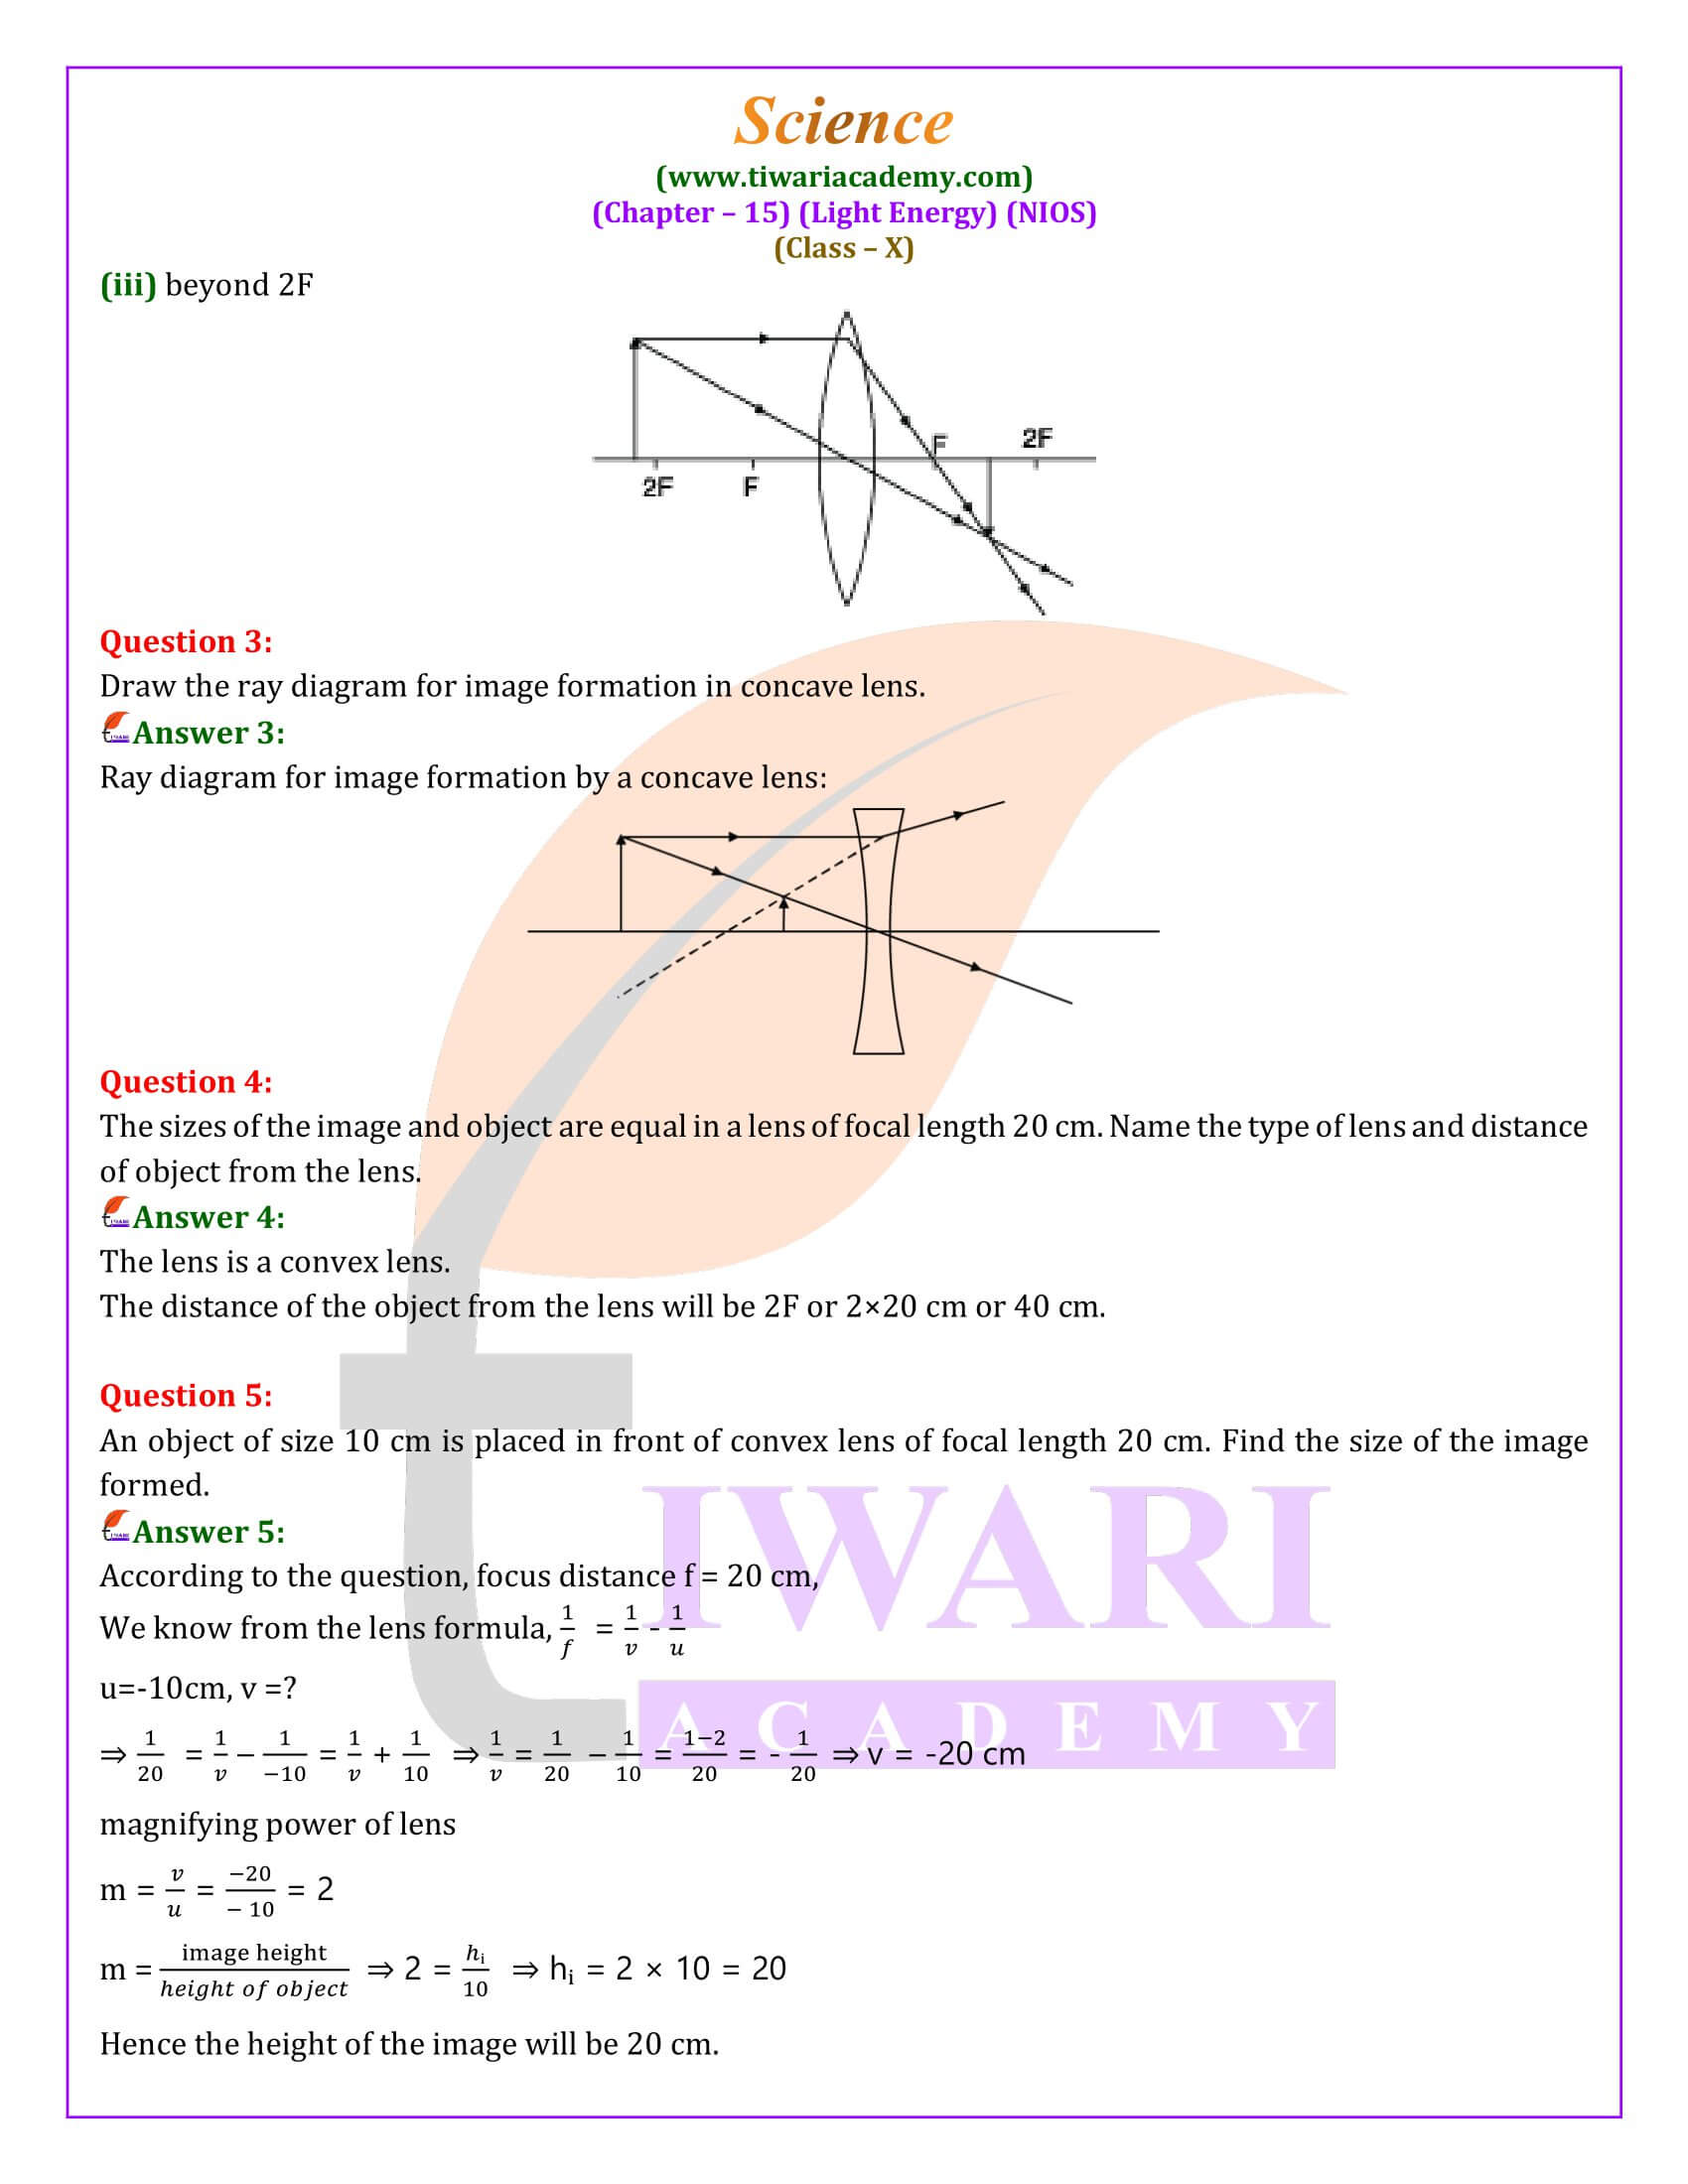 NIOS Class 10 Science Chapter 15 Answers